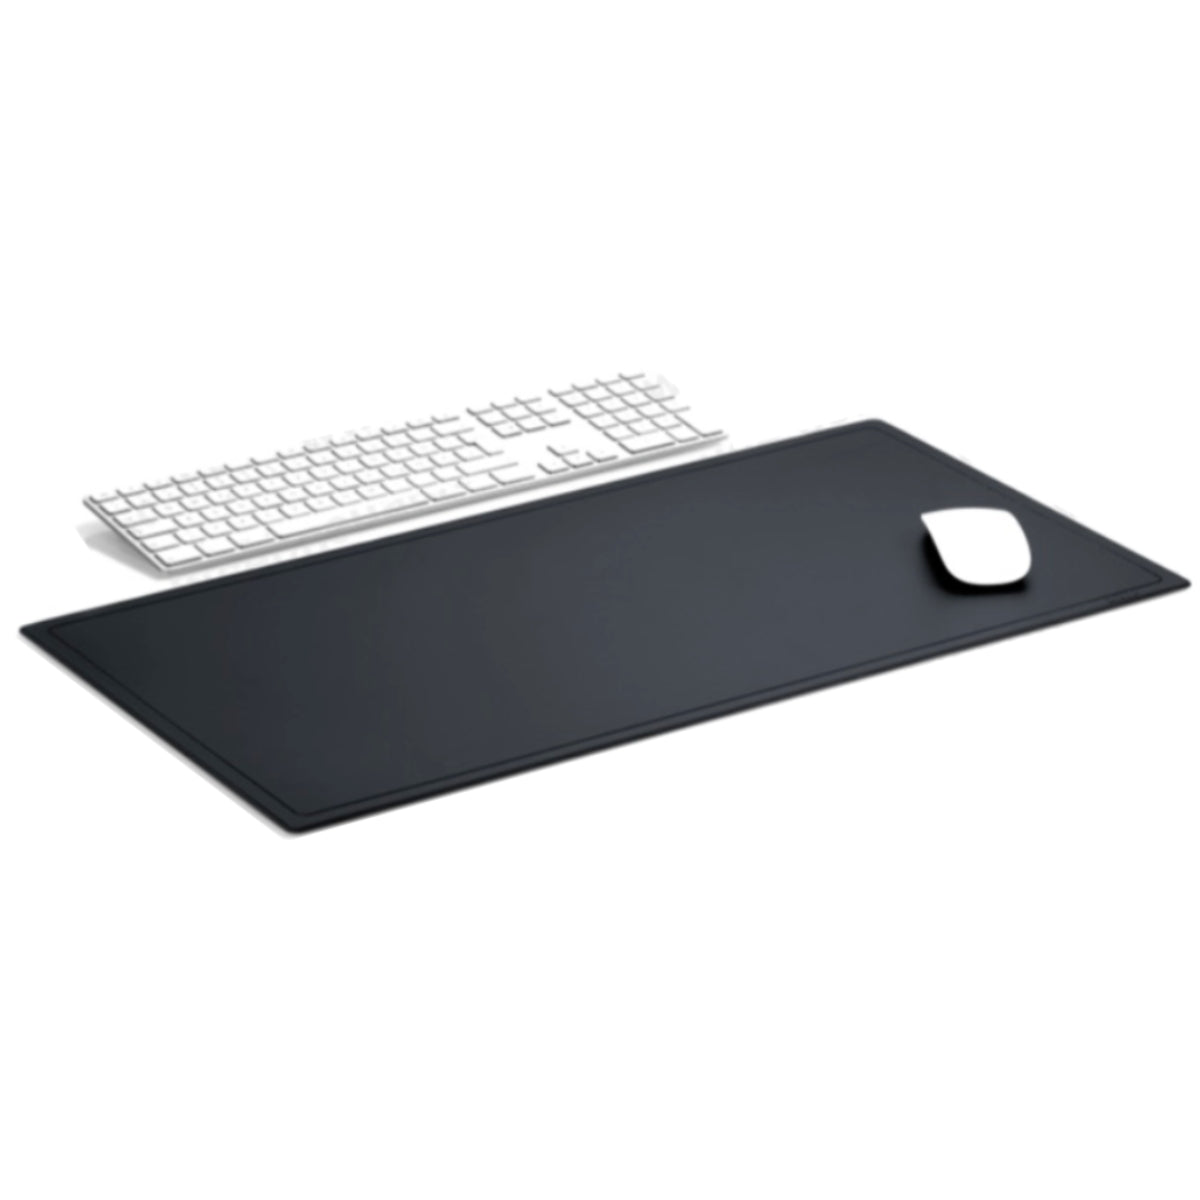 Desk Pads & Sets - Stationery and Office Supplies Online